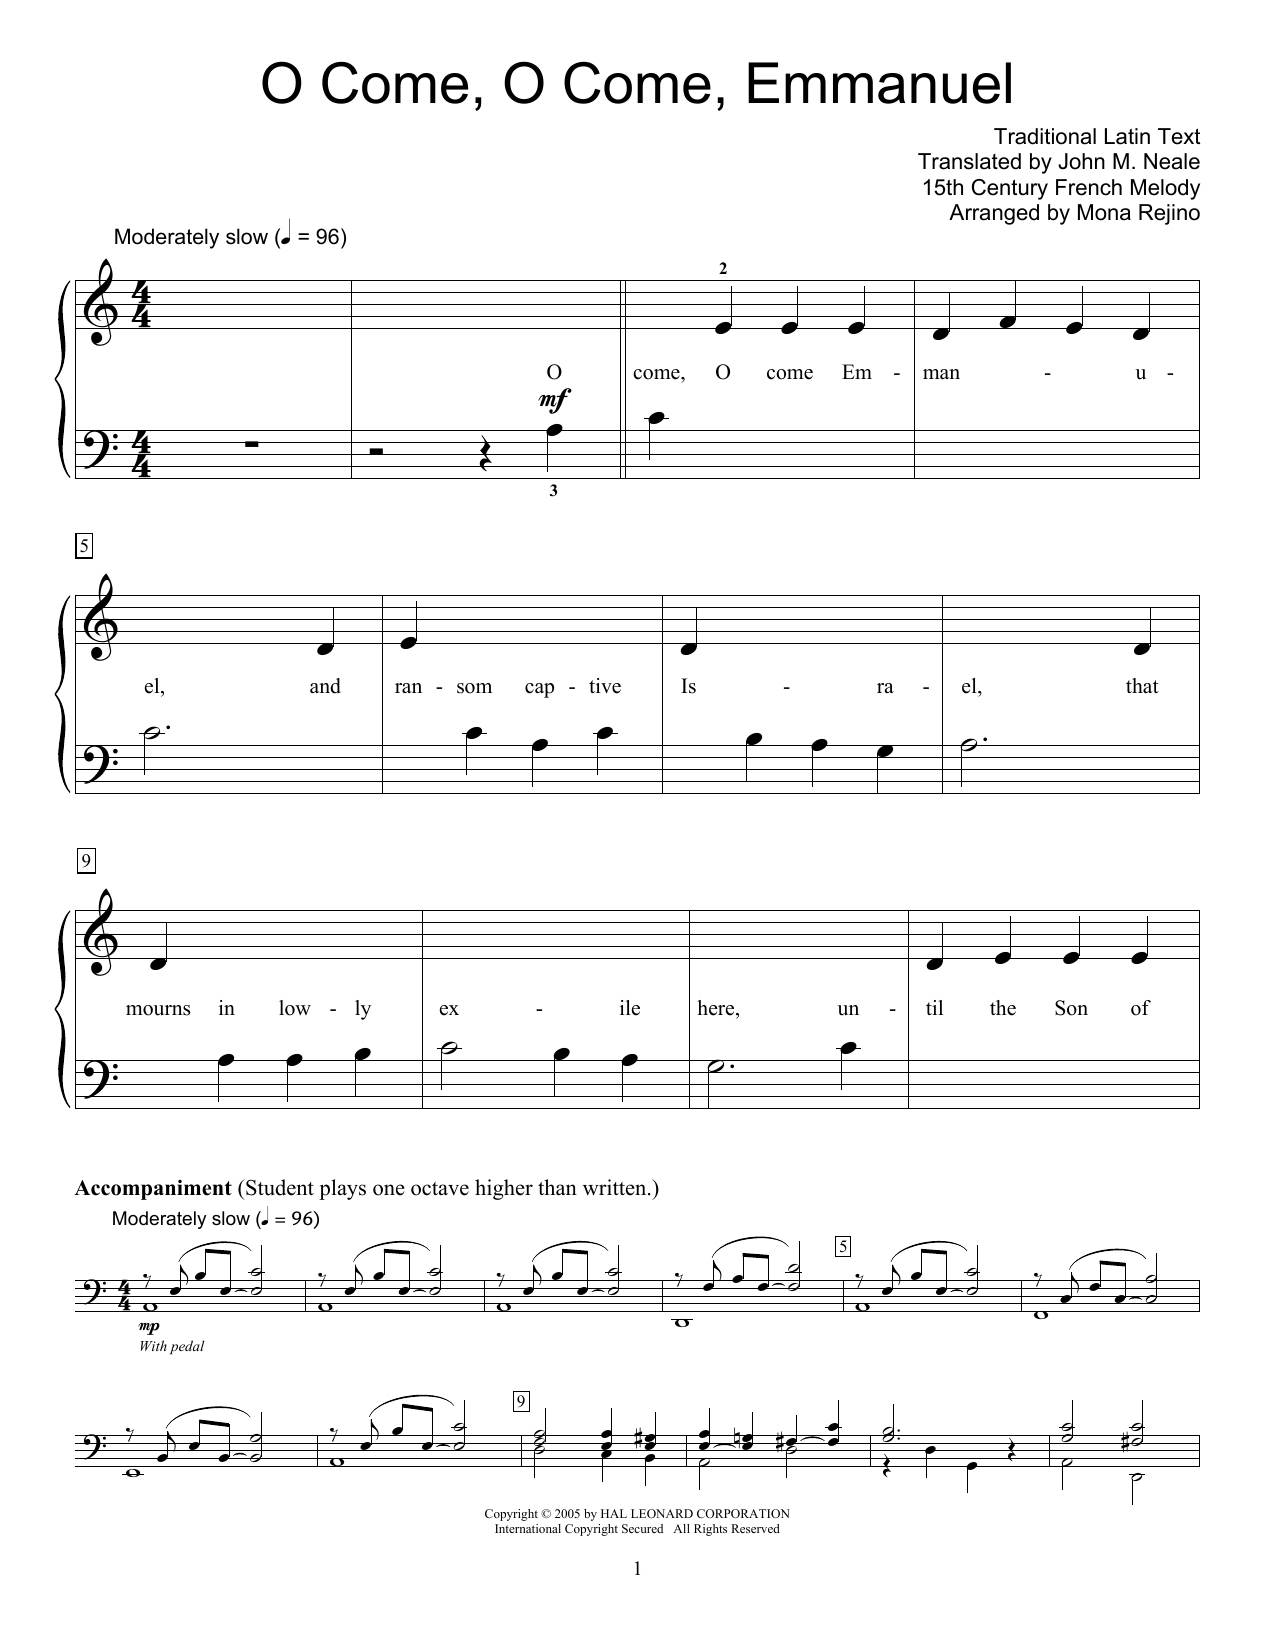 15th Century French Melody O Come, O Come, Emmanuel sheet music notes and chords. Download Printable PDF.